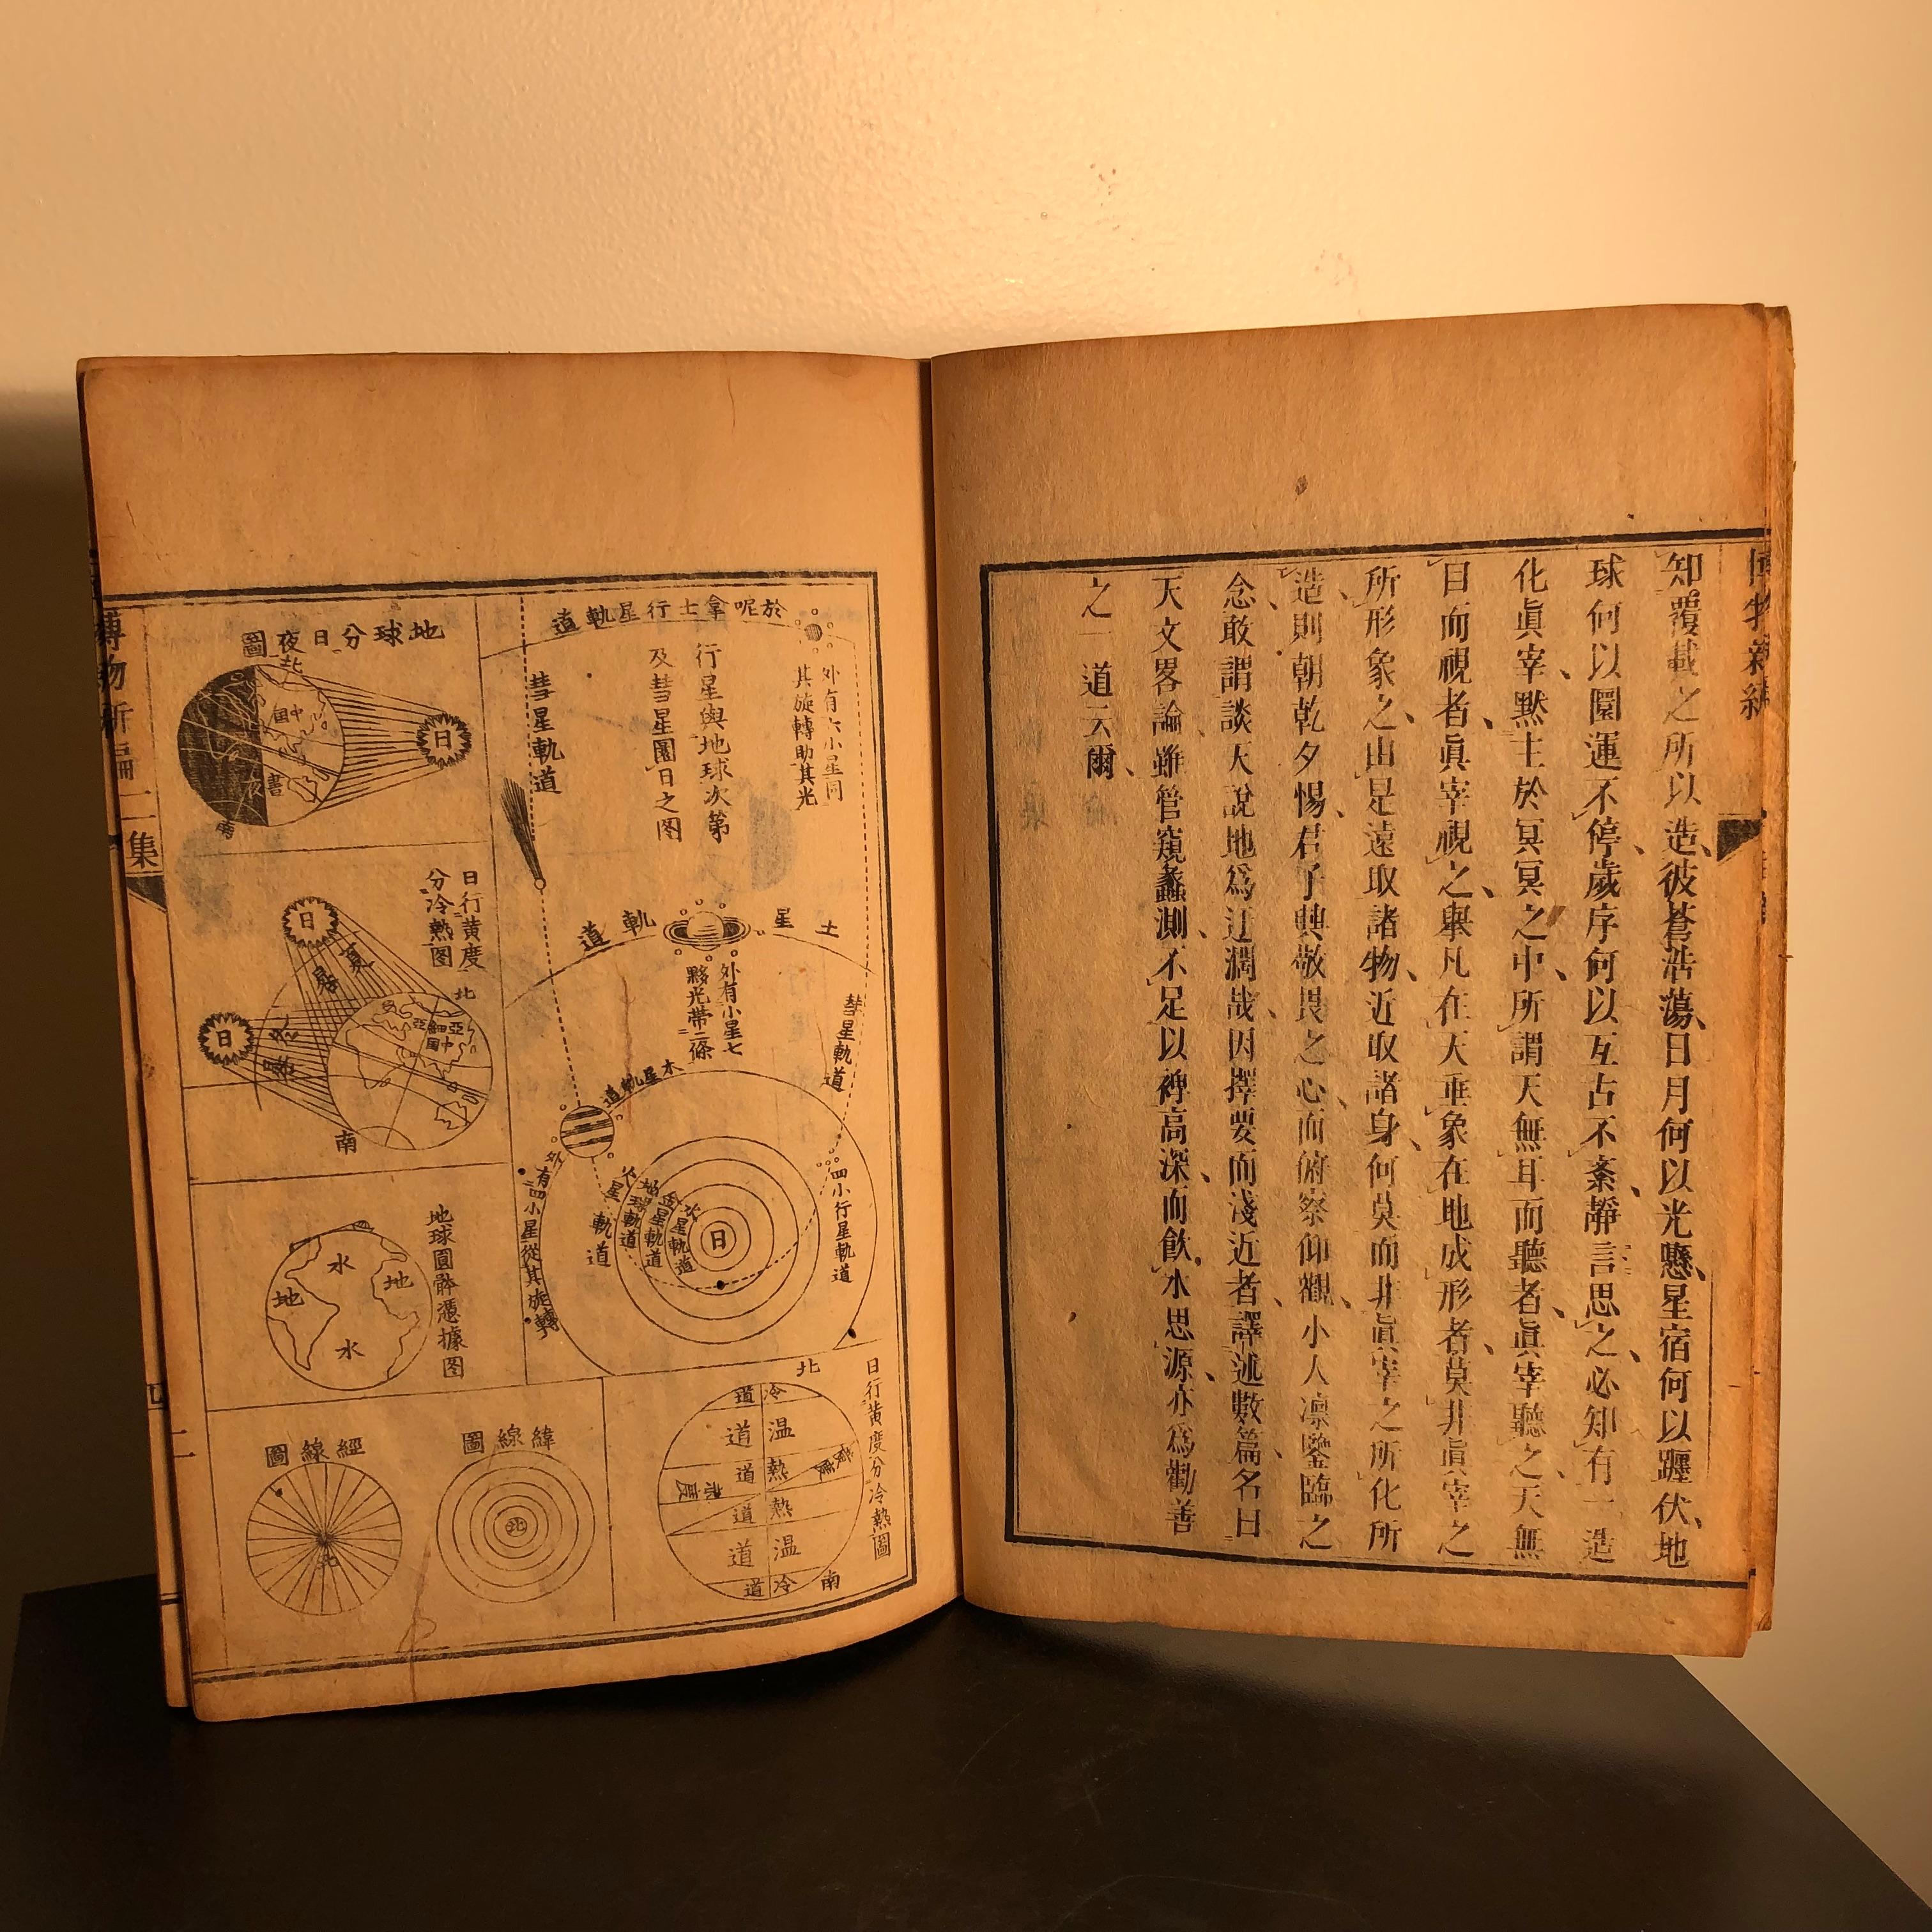 Important Astronomy Telescope Japanese Antique Woodblock Book 1872 Superb Prints 1